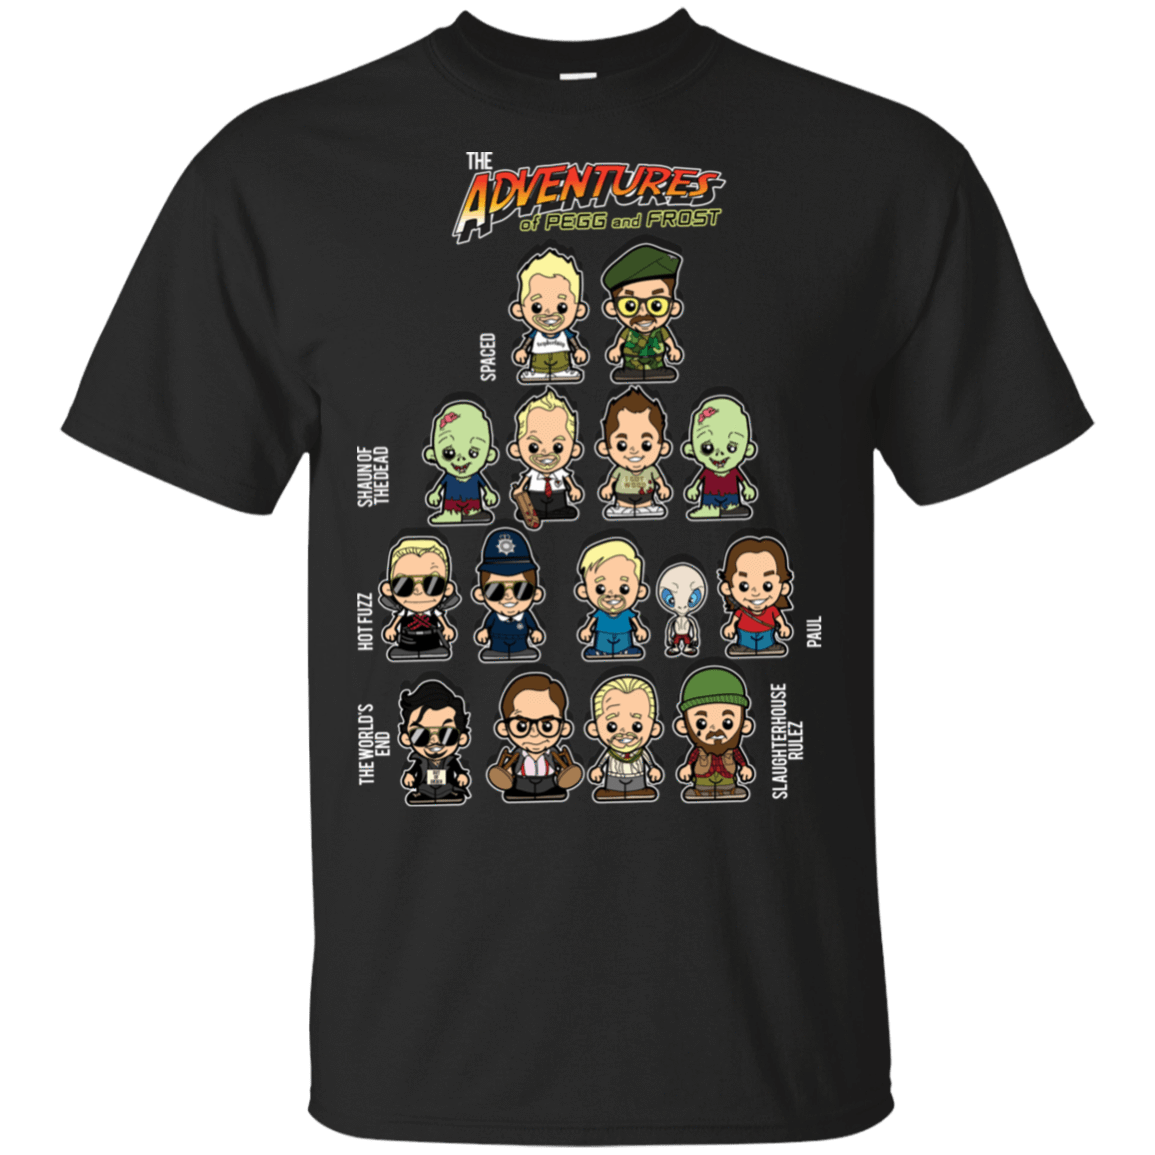 T-Shirts Black / S The Adventures of Pegg and Frost T-Shirt